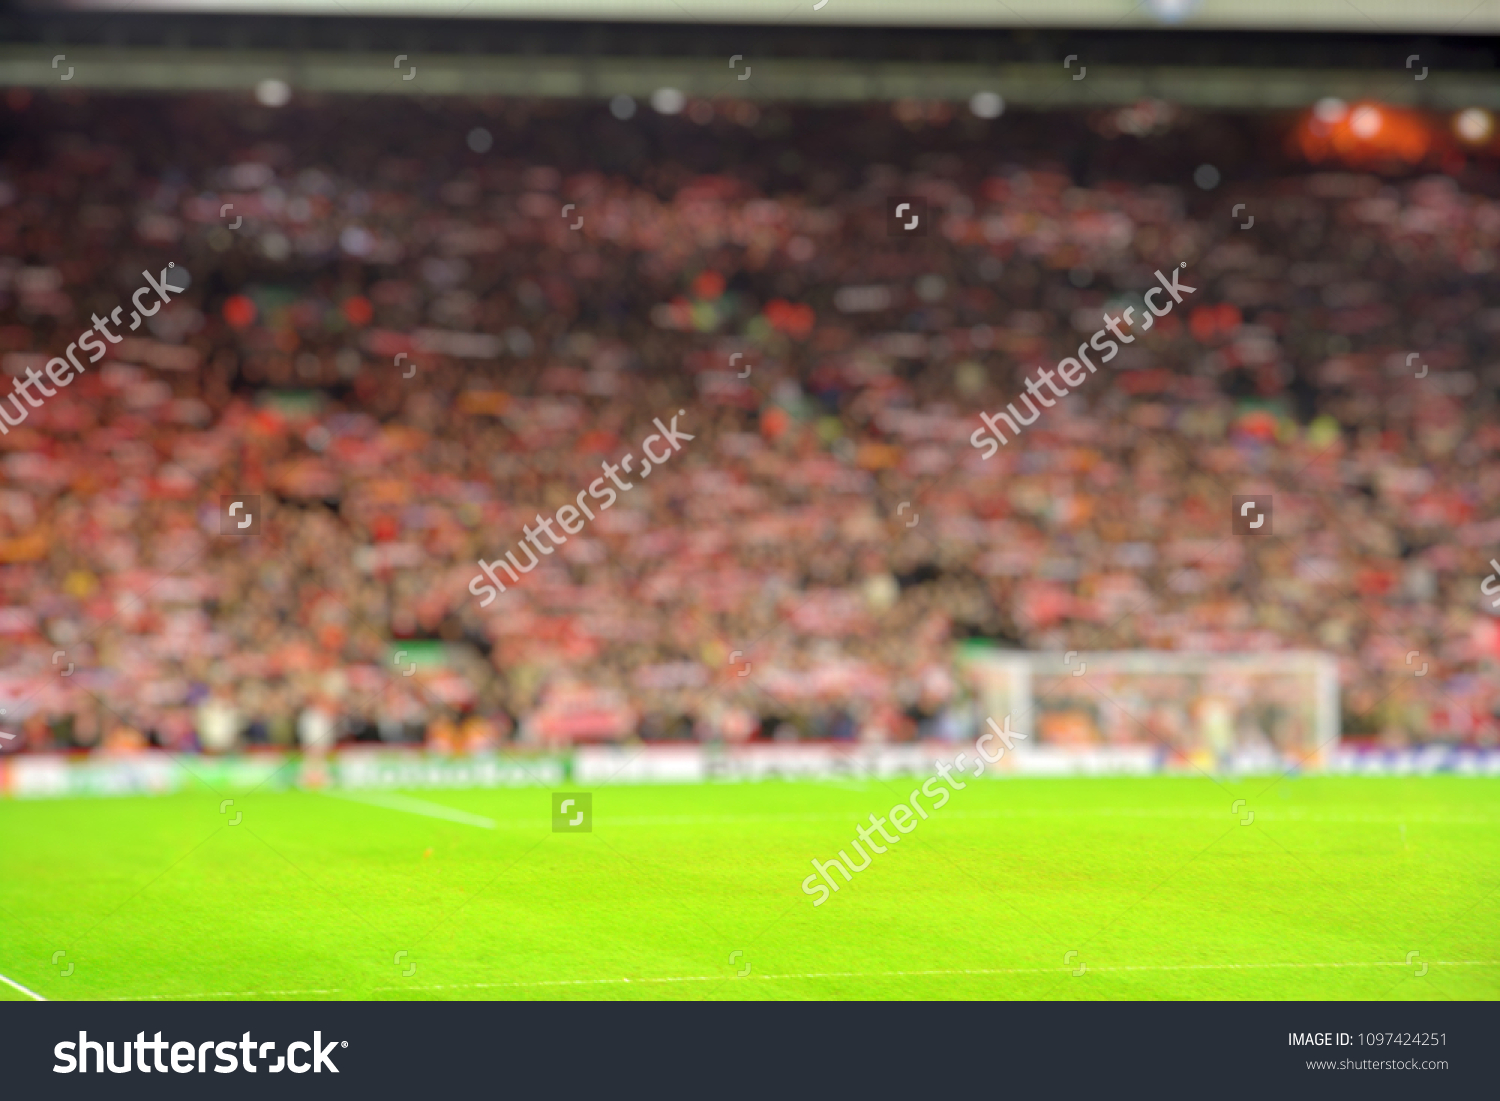 Blurred background of football stadium and soccer fans in match day on beautiful green field with sport light at the stadium.Sports,Athlete,People Concept.Anfield,Liverpool #1097424251